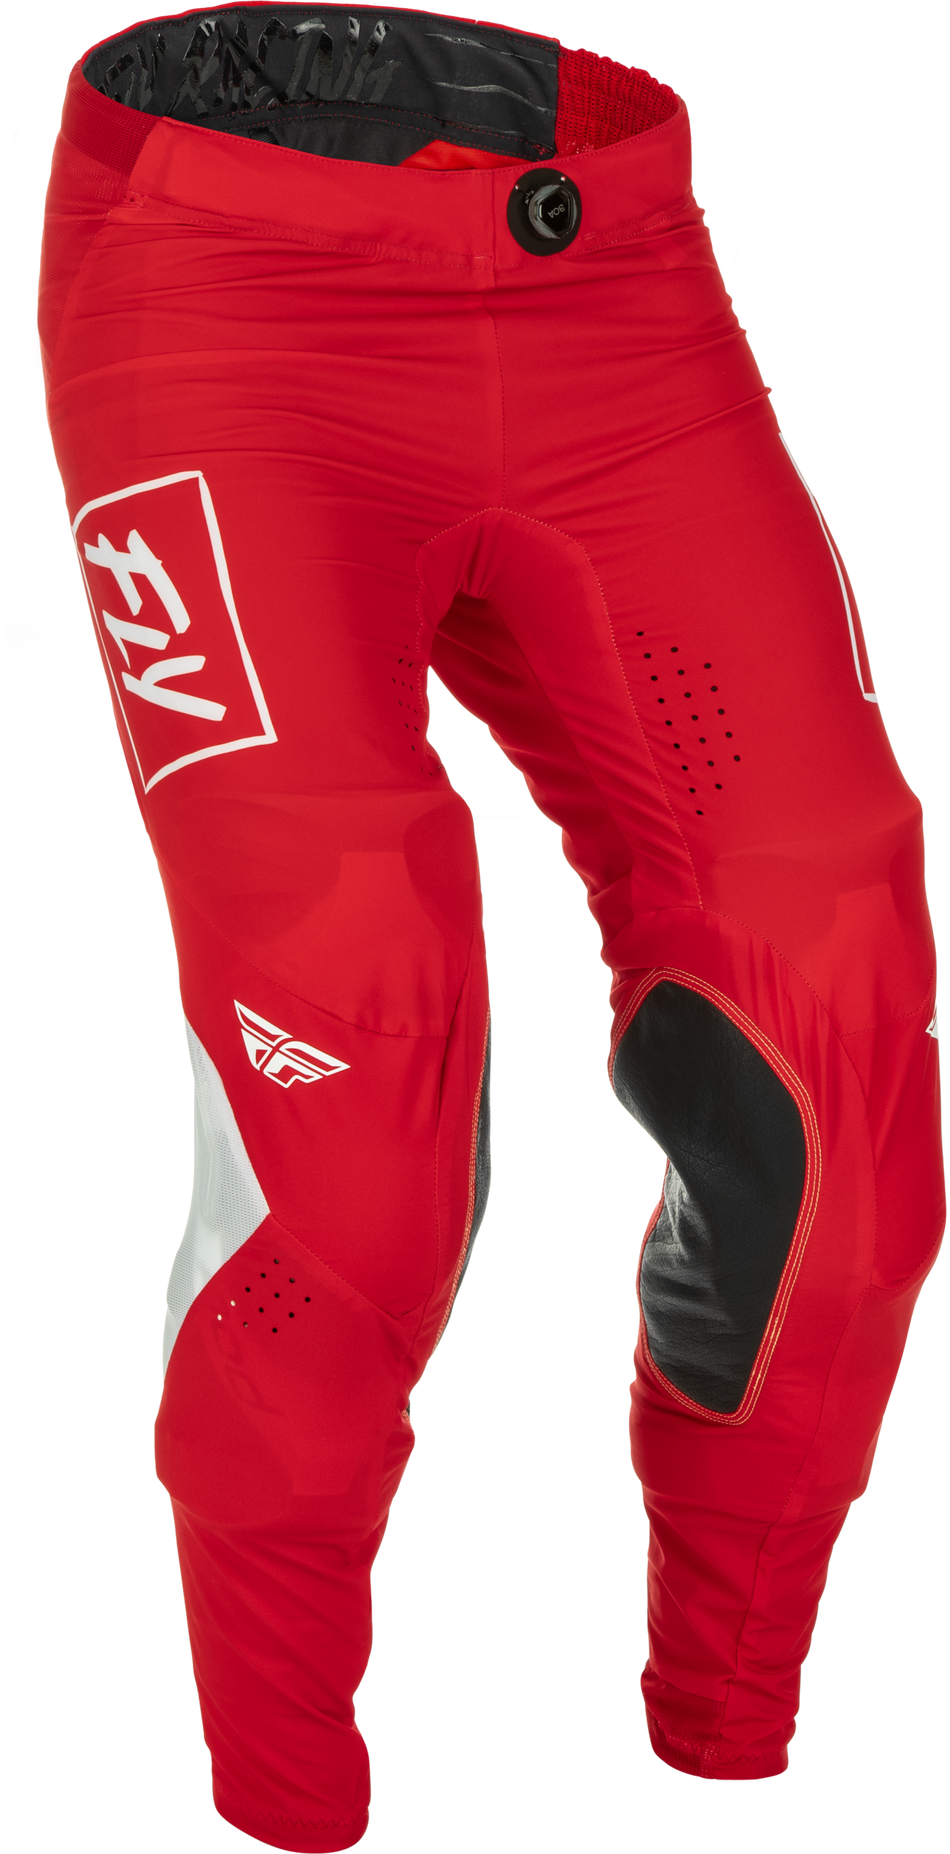 FLY RACING Lite Pants Red/White Size 30 375-73230